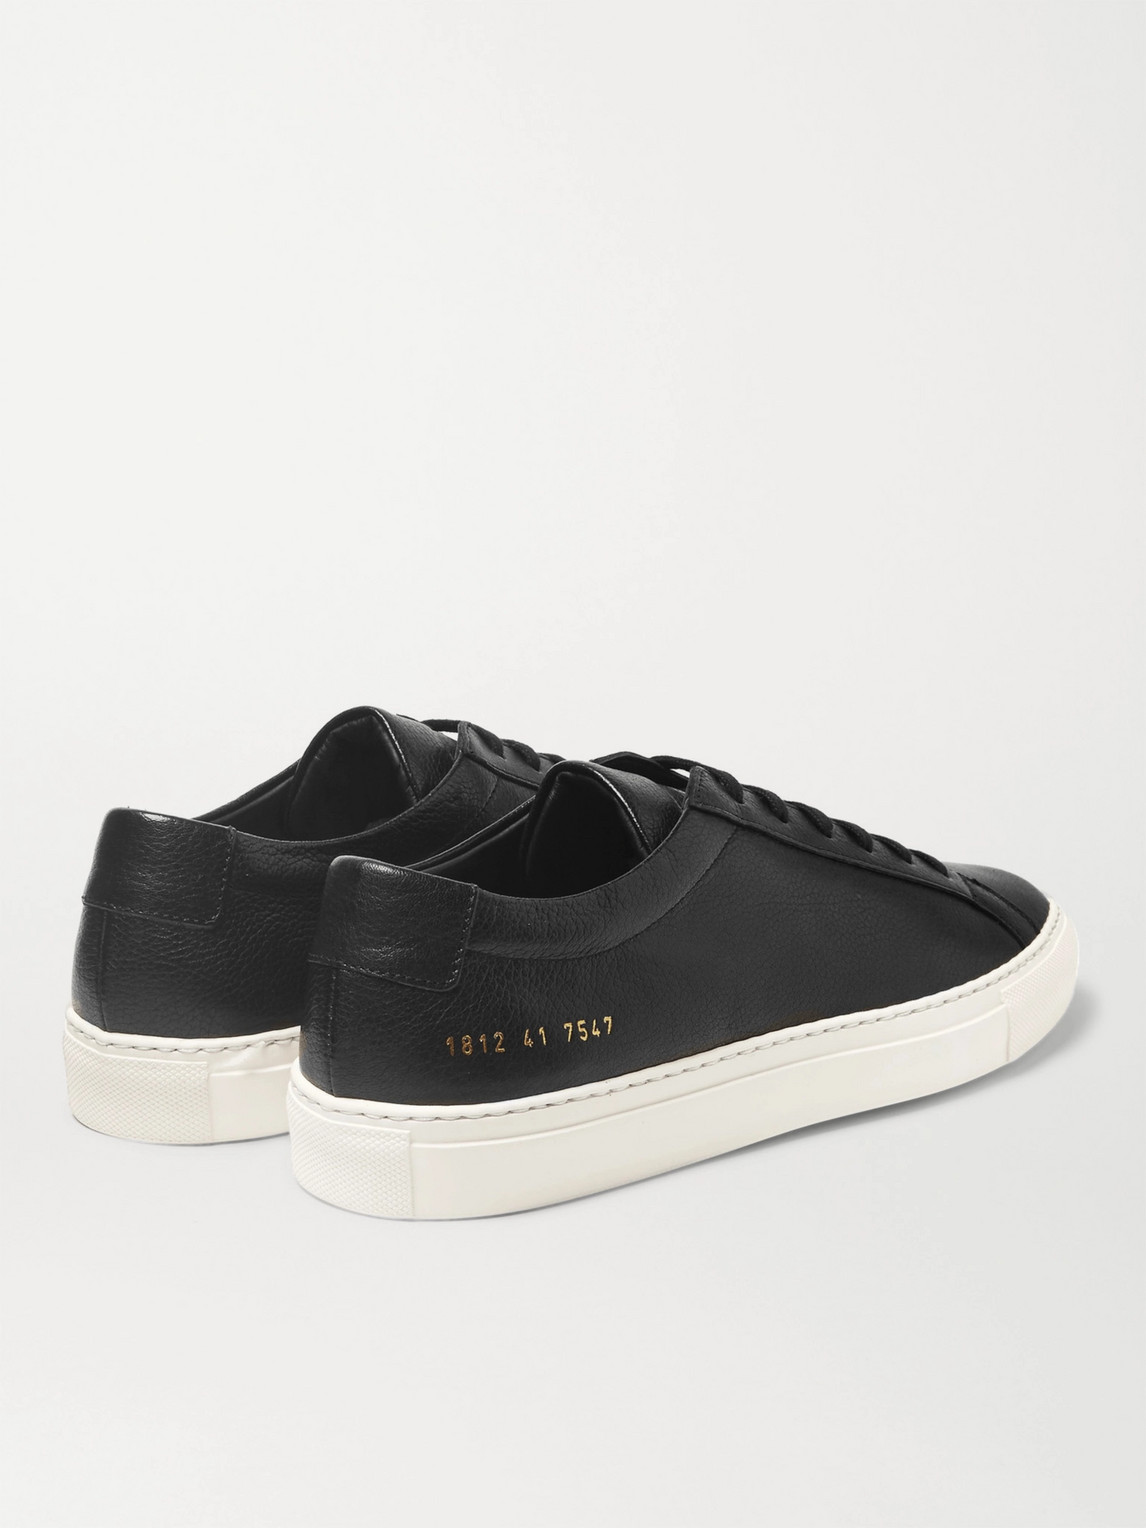 Shop Common Projects Original Achilles Full-grain Leather Sneakers In Black